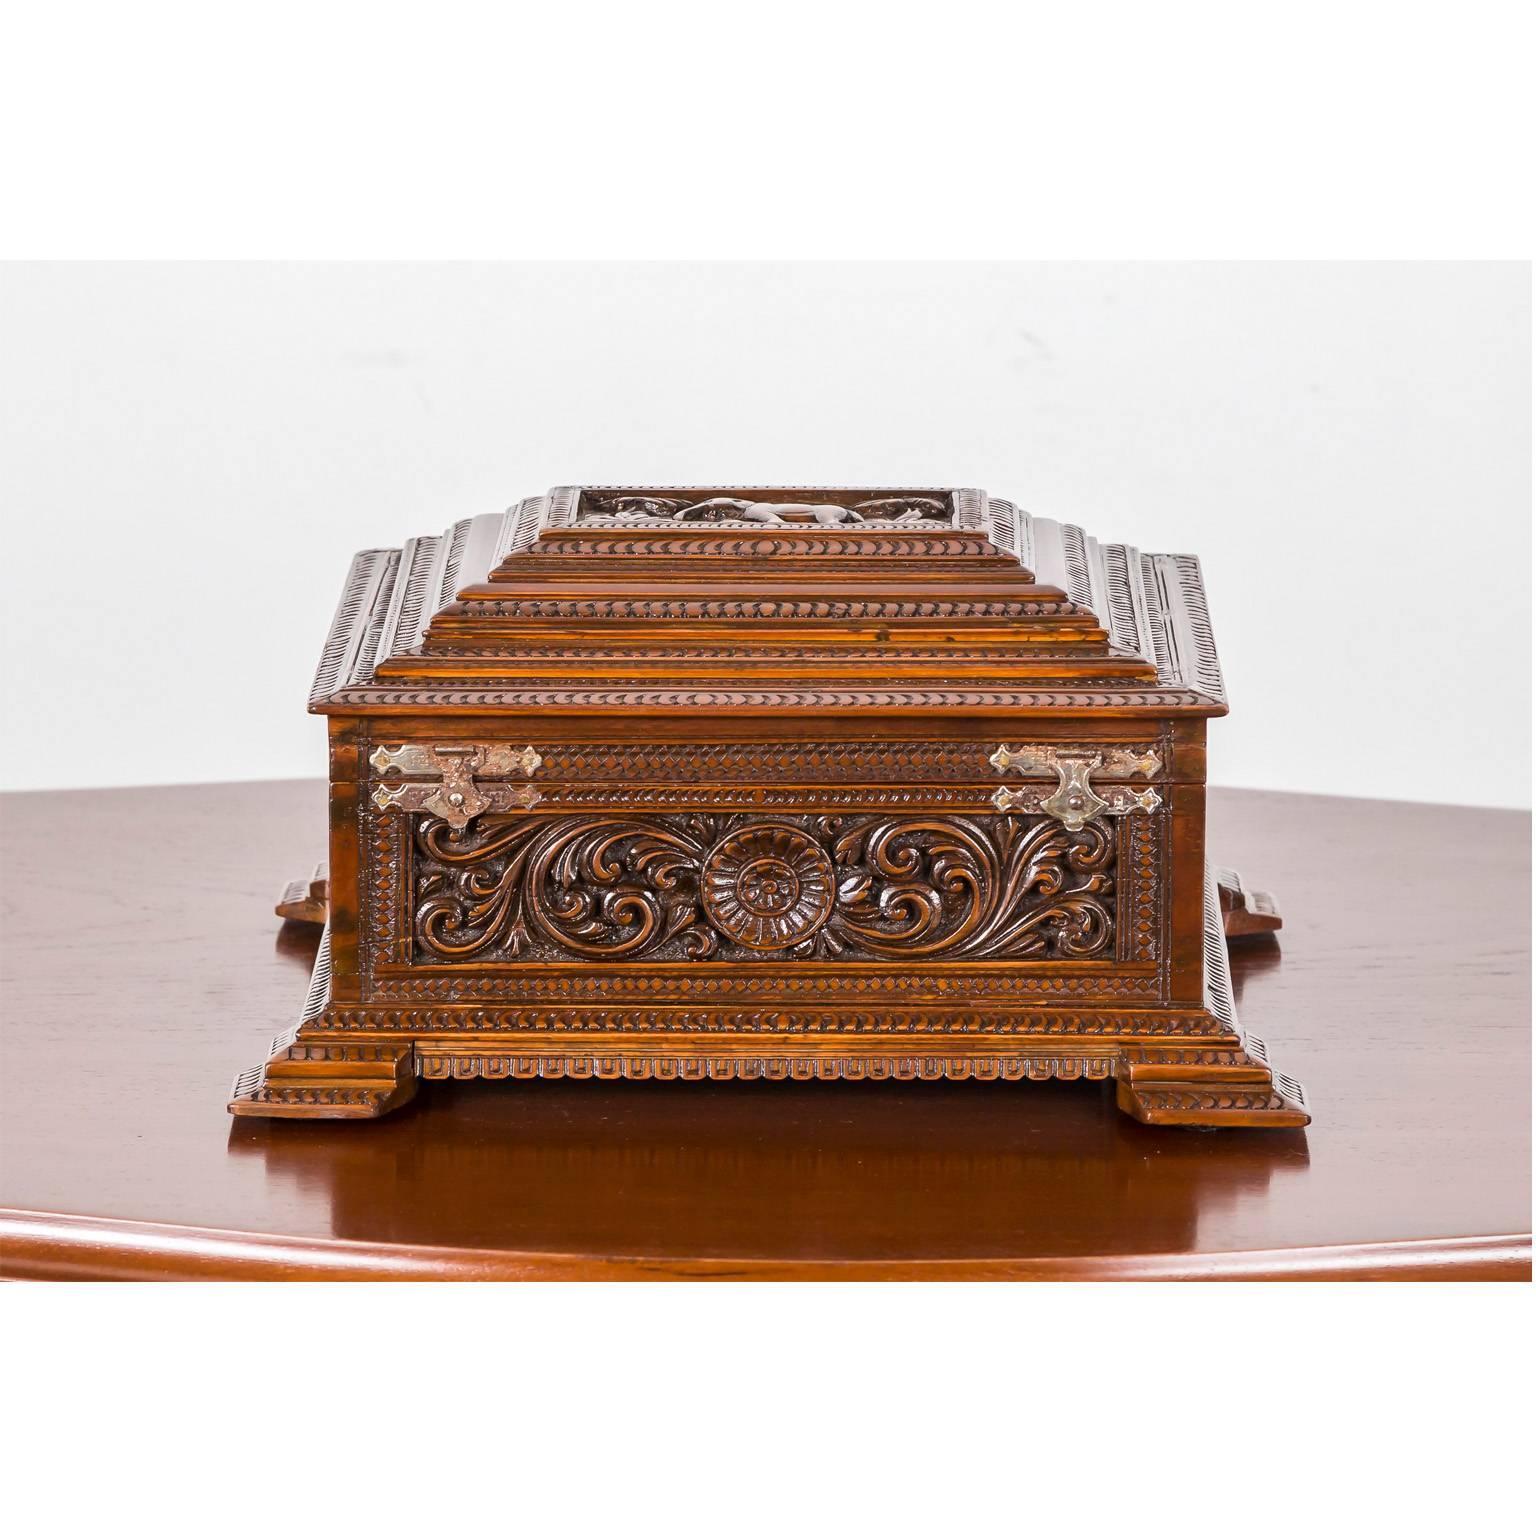 A gorgeous British colonial dome-shaped box made of sandalwood, beautifully and profusely carved on the four sides with floral designs. The lid is carved with an image of an elephant, flanked by two palm trees. 
The box opens to a plain interior